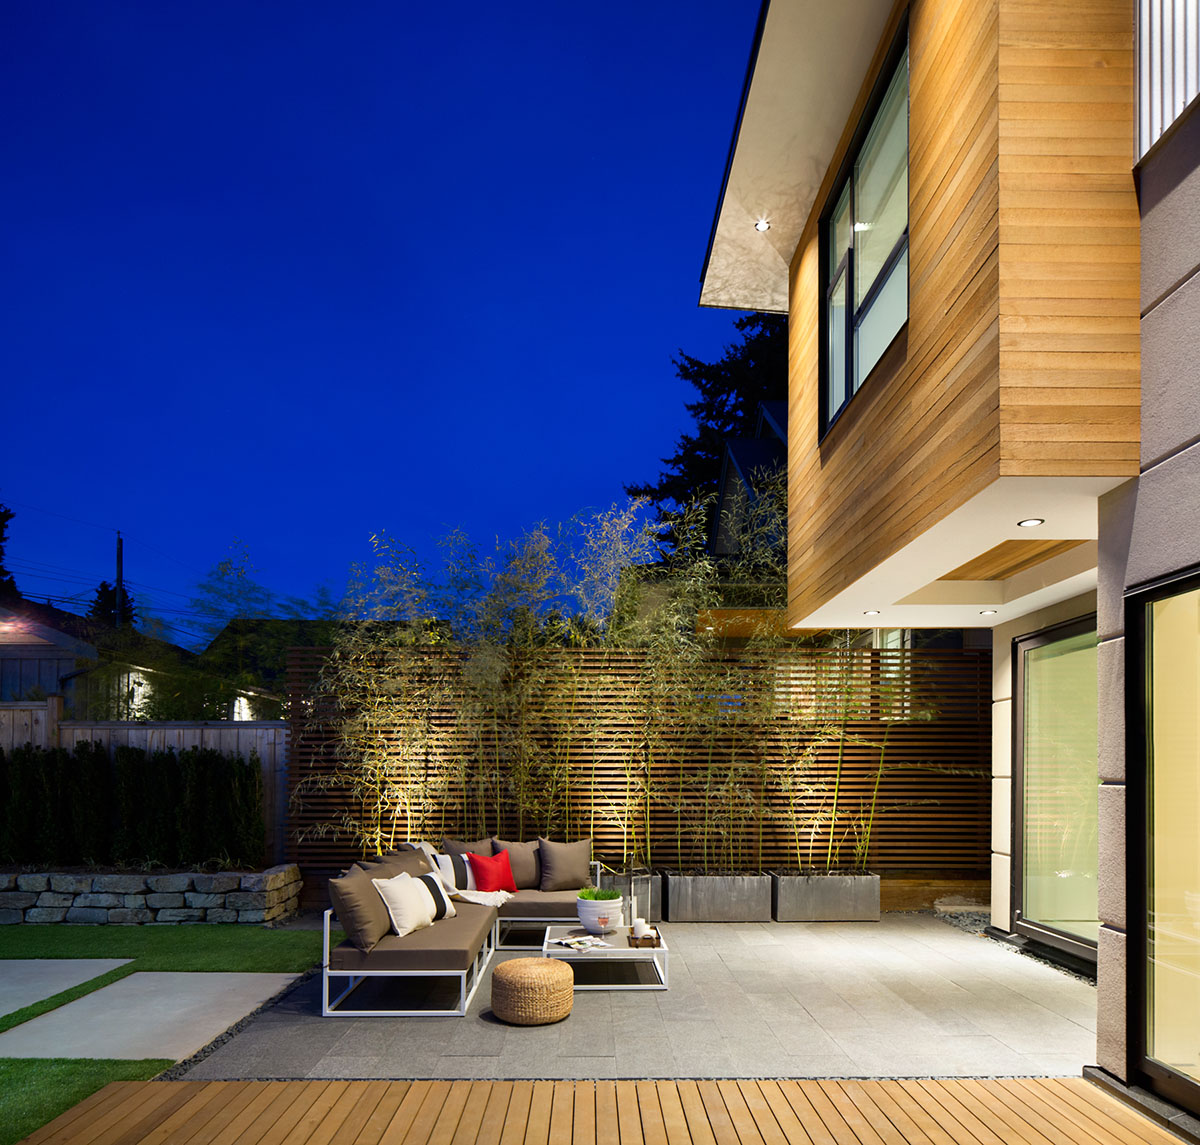 Outdoor living space at night